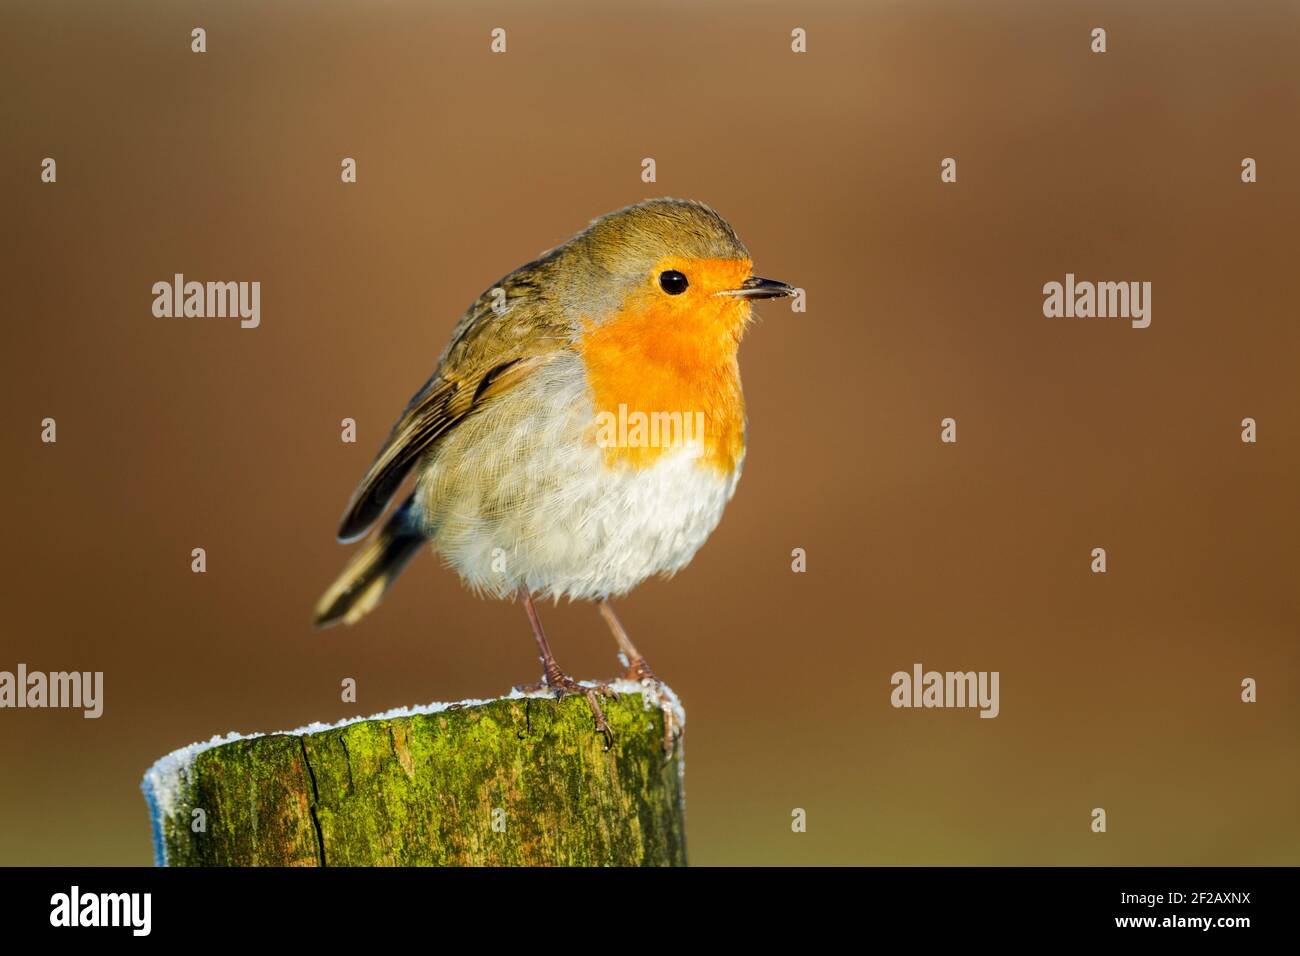 European robin (Erithacus rubecula) perched on a wooden post with a dusting of snow against a smooth background in warm light Stock Photo